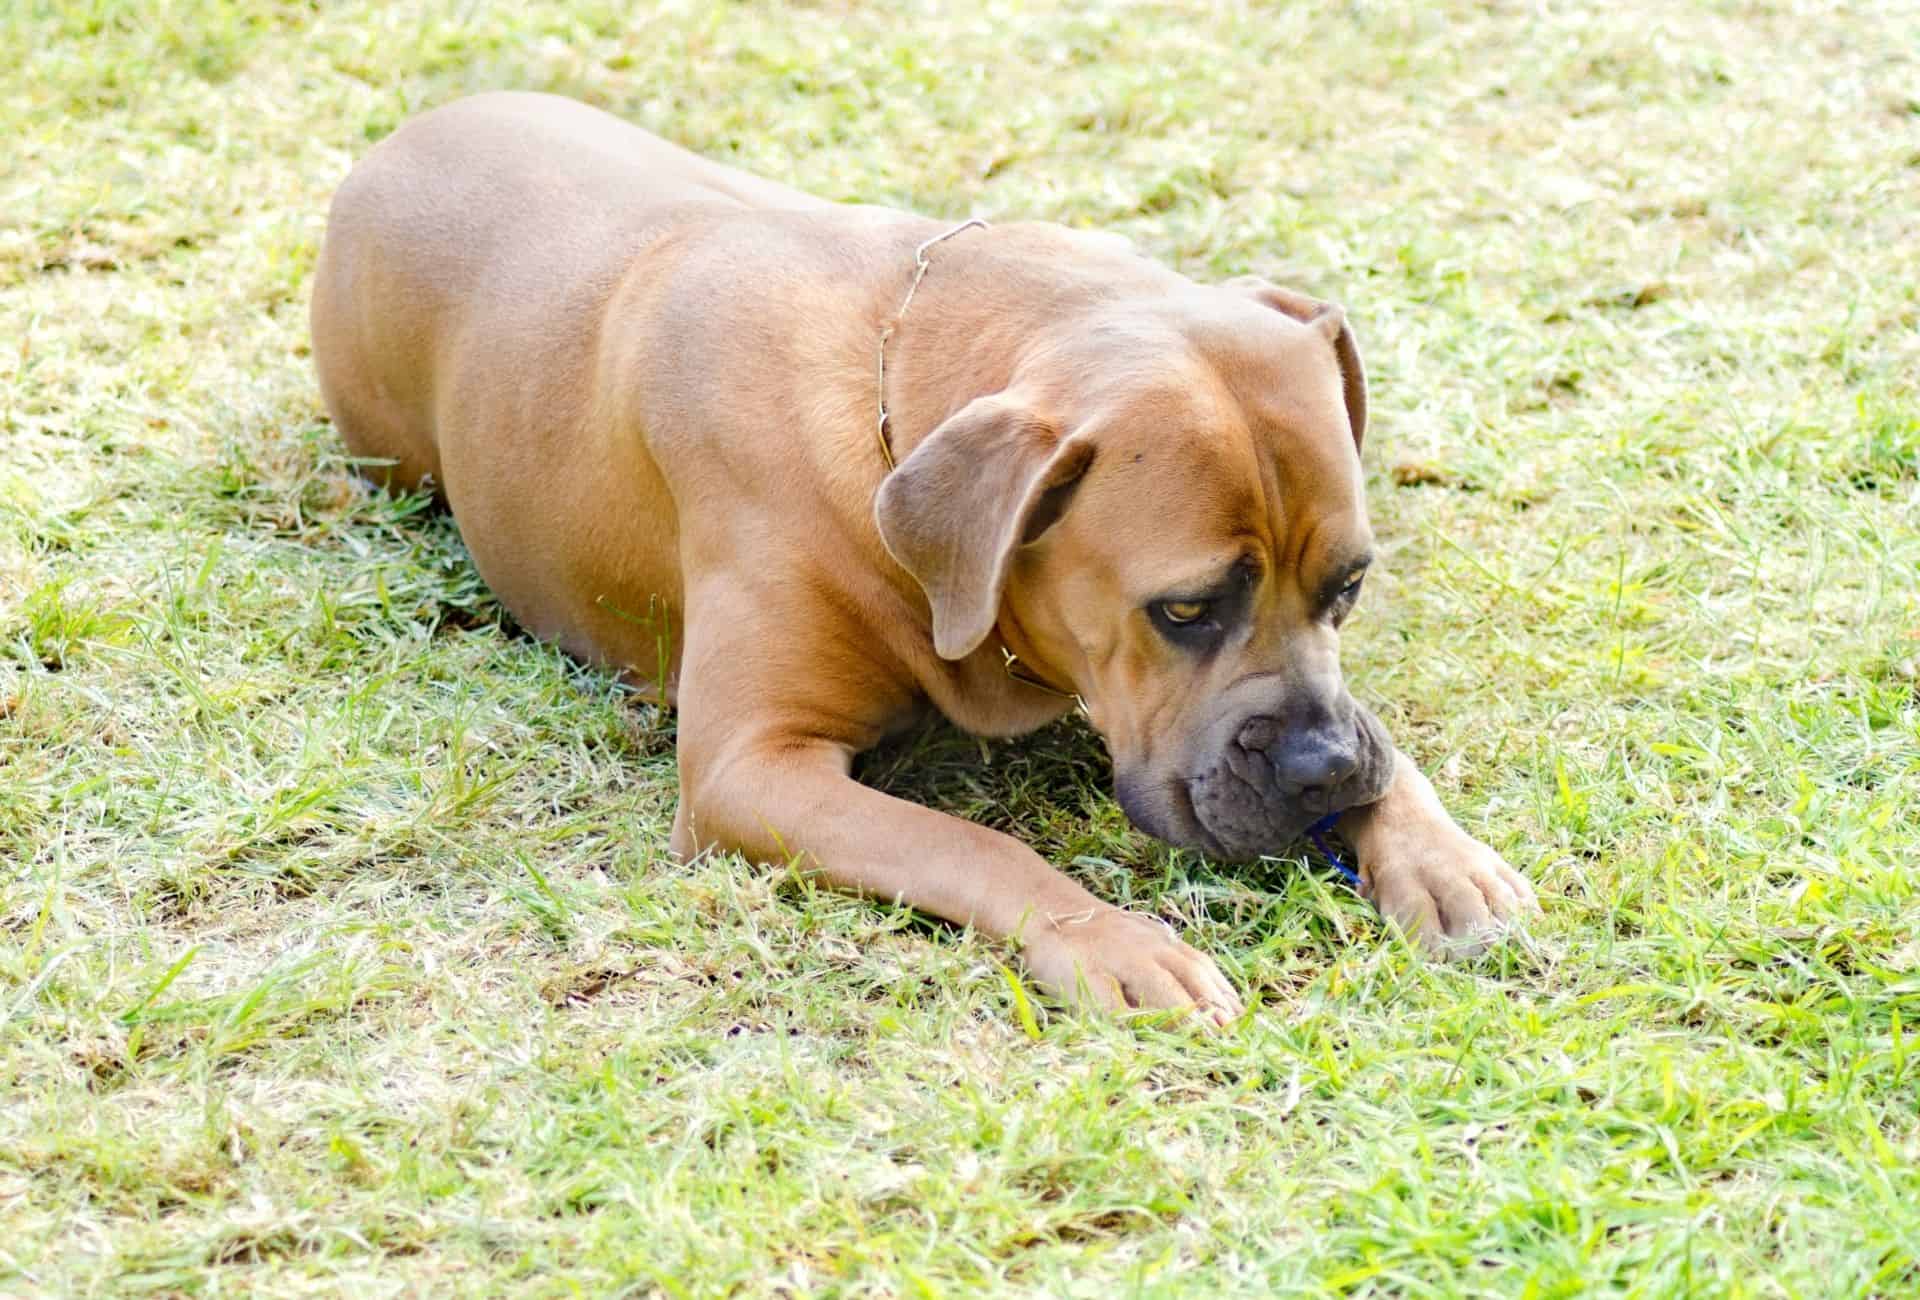 Fawn Cane Corso lying on grass.